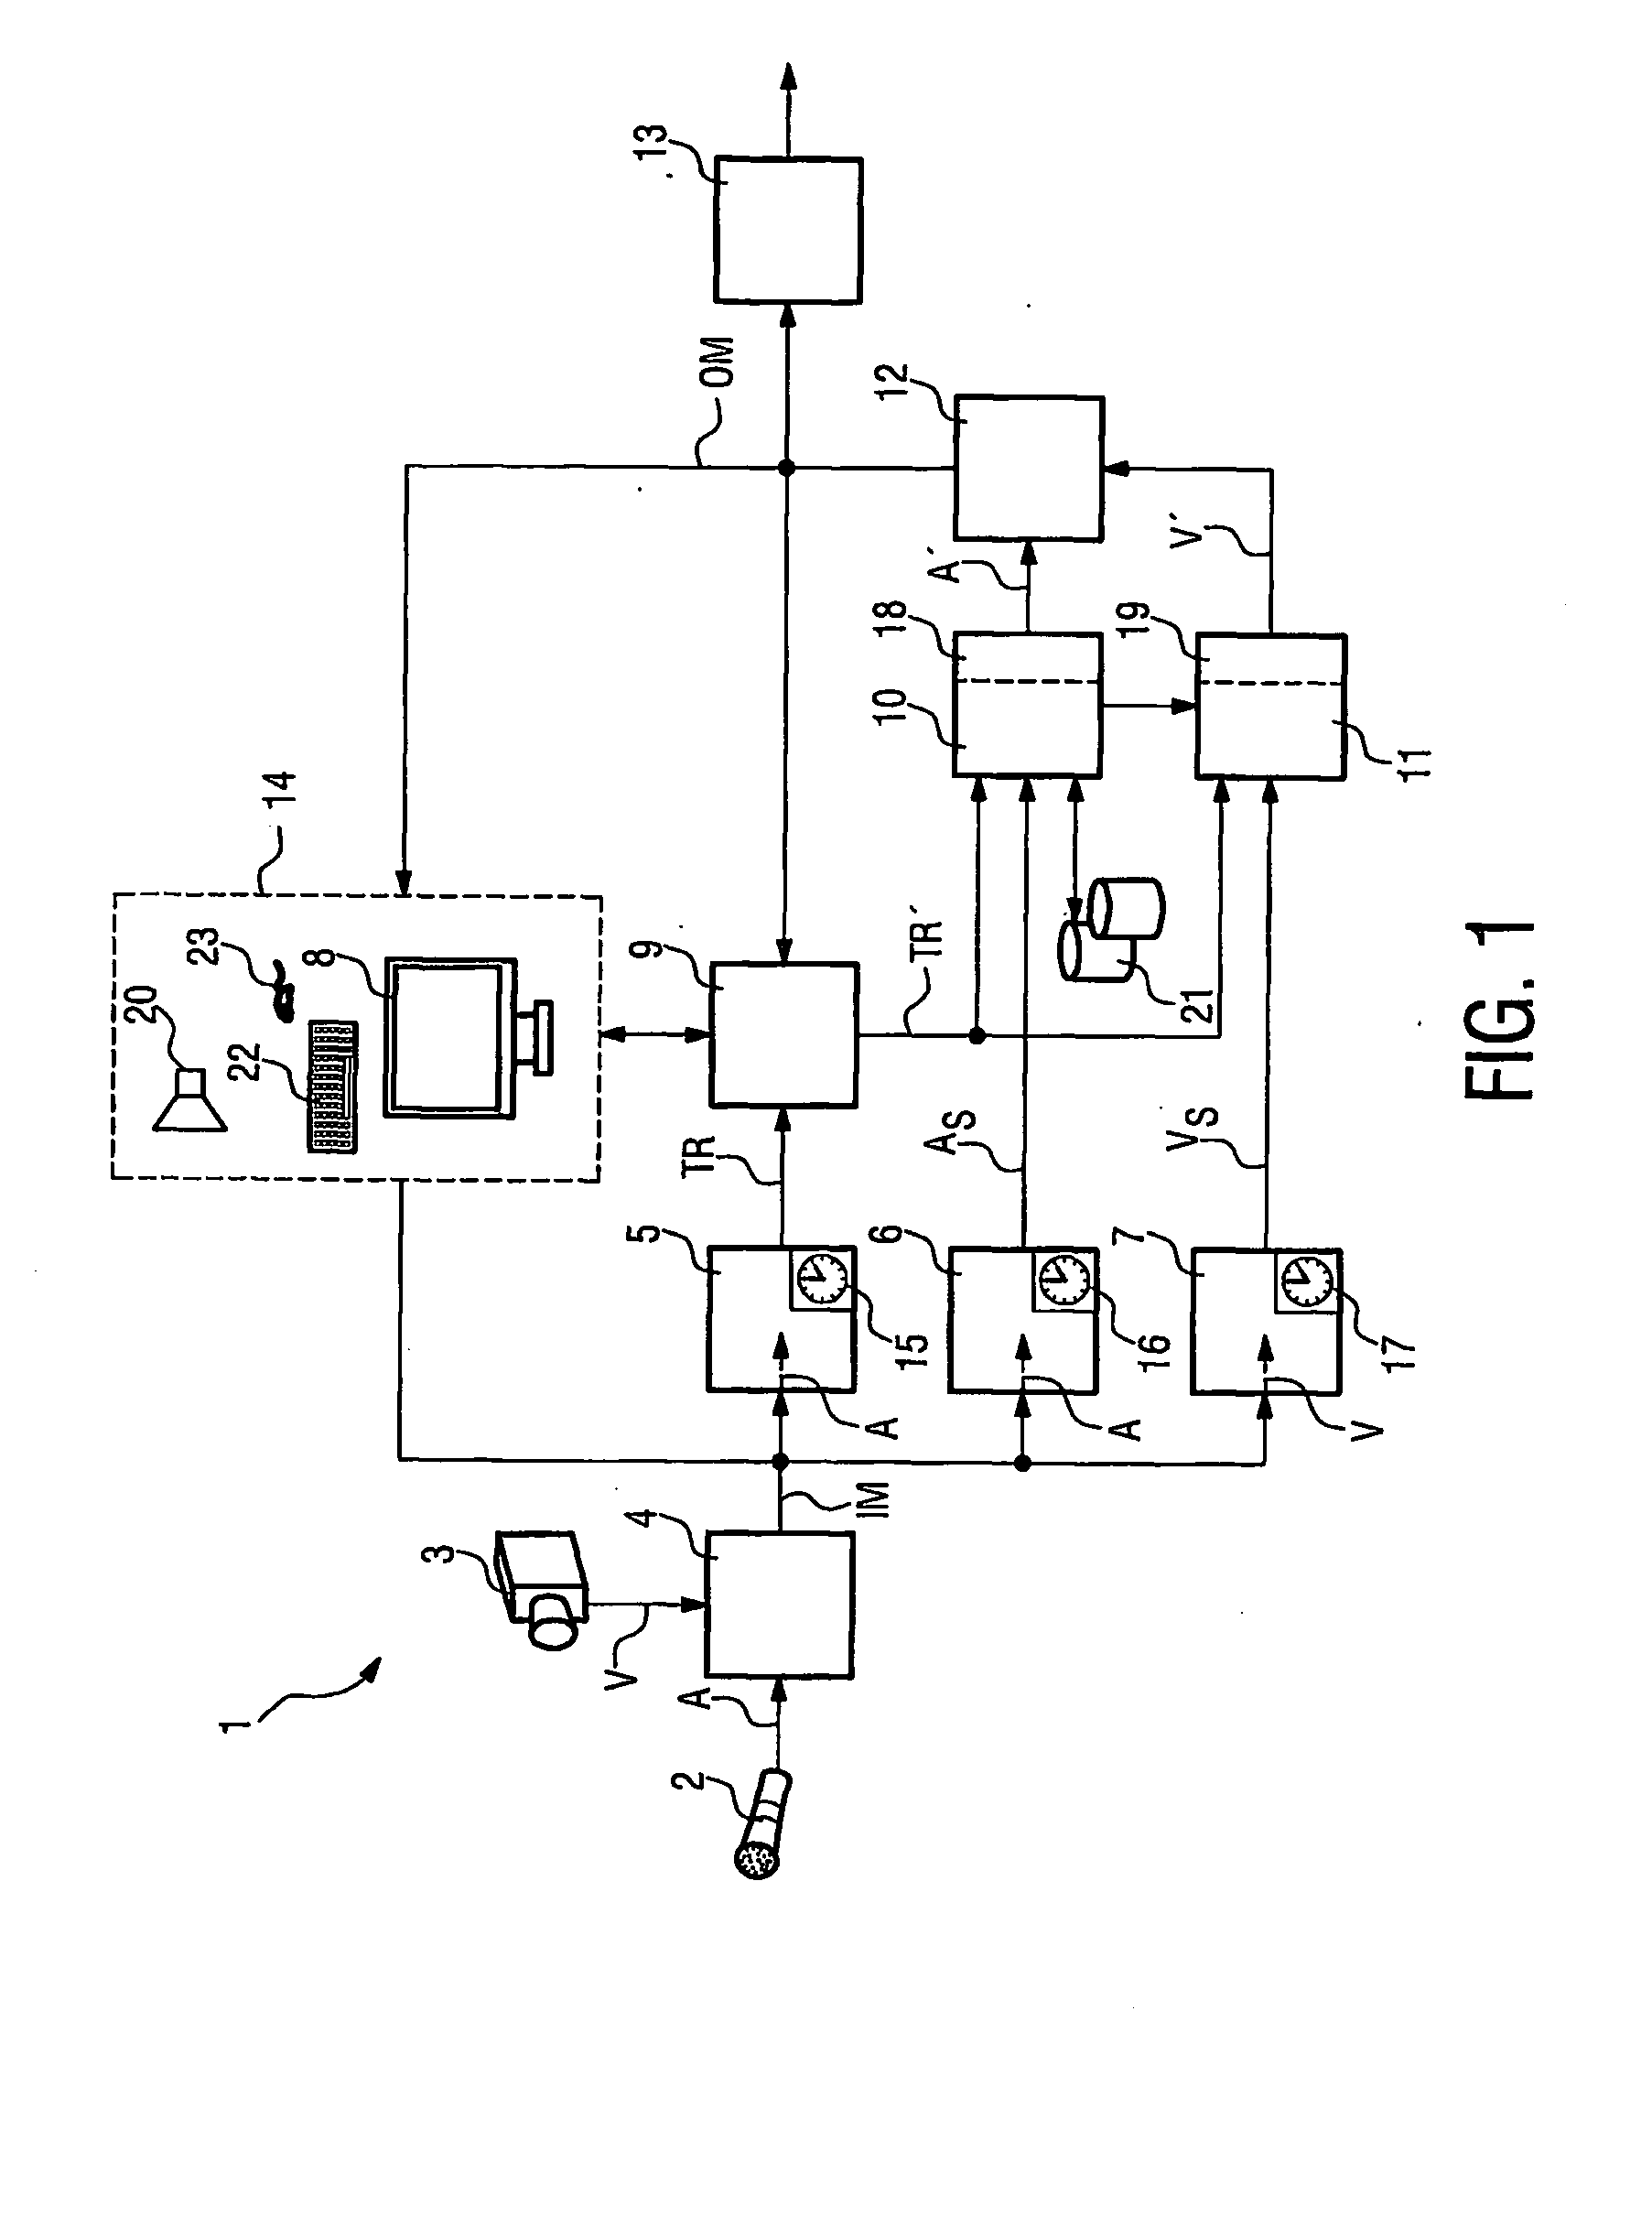 Method of and System for Modifying Messages